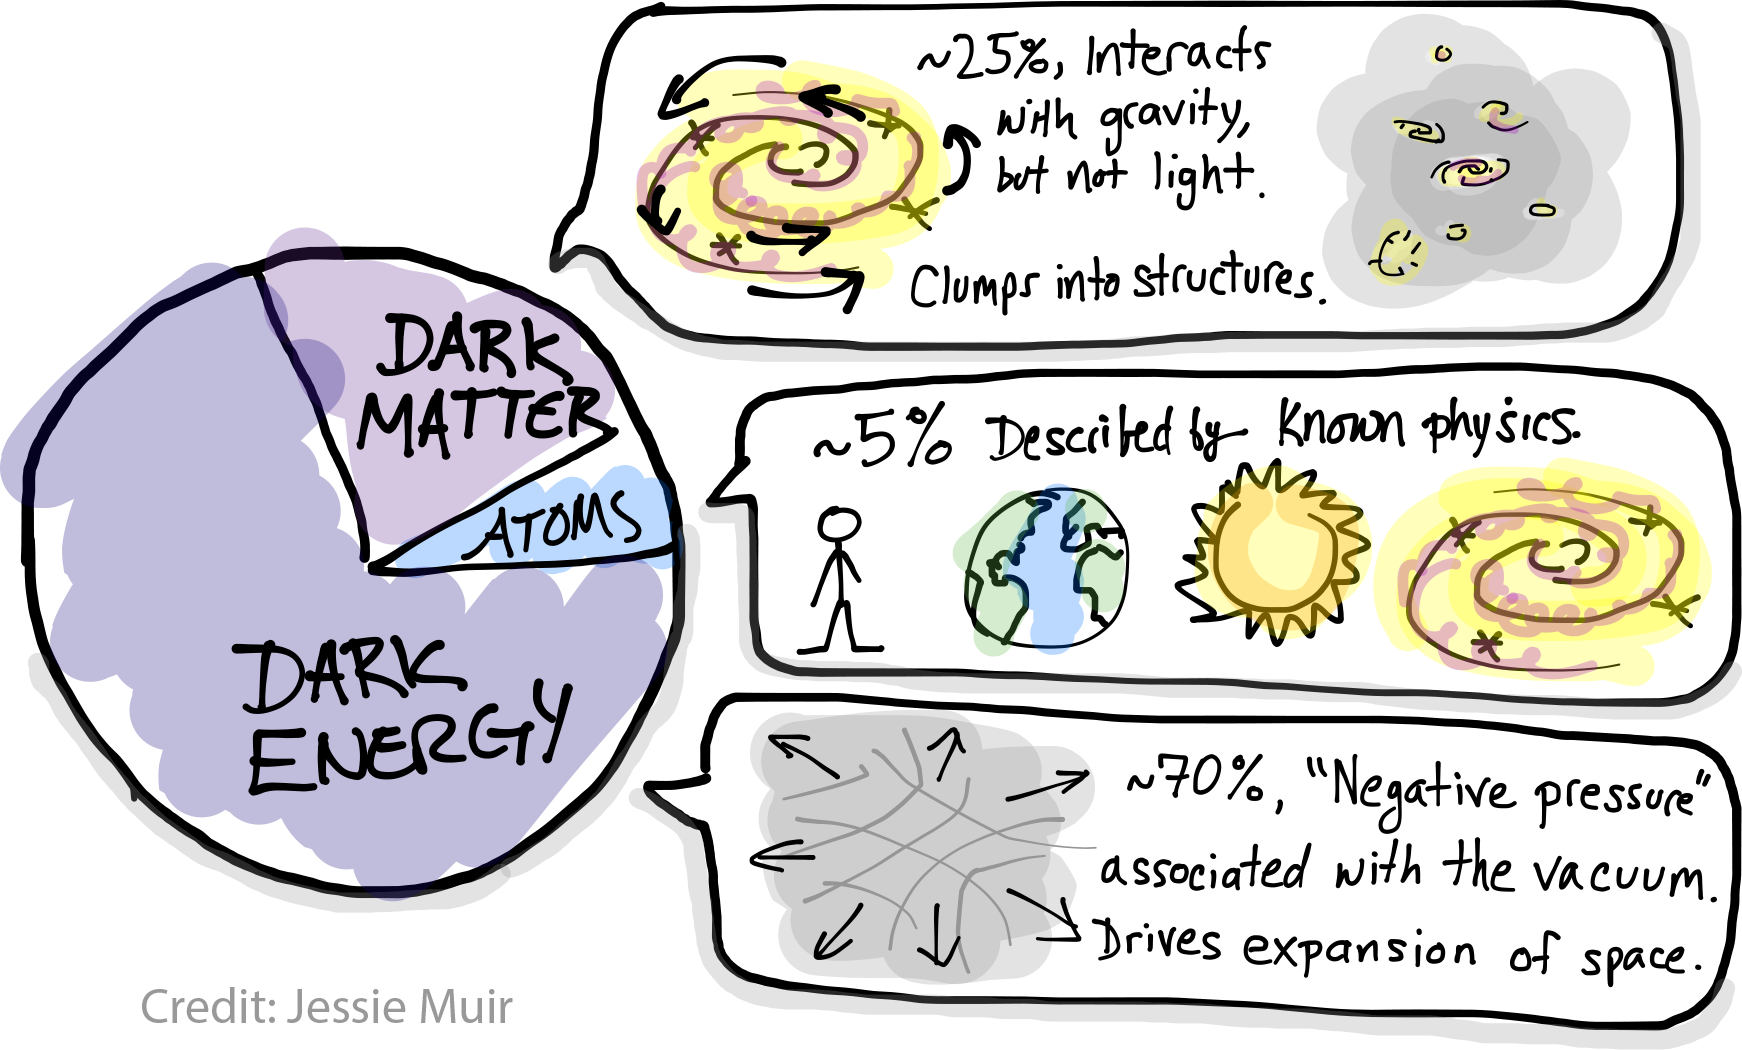 alt="Cartoon version of the Lambda CDM pie chart describing the matter and energy content of the Universe. A 5\% slicee is labeled 'atoms', 25\% is labeled 'dark matter', and 70\% is labeled 'dark energy'. Speech bubbles contain descriptions of these with some simple illustraitons. The dark matter bubble shows a galaxy with arrows indicating rotation, and a group of galaxies in a gray blob representing a dark matter halo. Its description says: 25\%, interacts with gravity but not light. Clumps into structures.' The atoms bubble says '5\% described by known physics' and contains a picture of a stick figure, earth, the sun, and a galaxy. The dark energy bubble says '70\%, negative pressure associated with the vacuum. Drives expansion of space," and contains a cartoon of a stretching space-time grid.